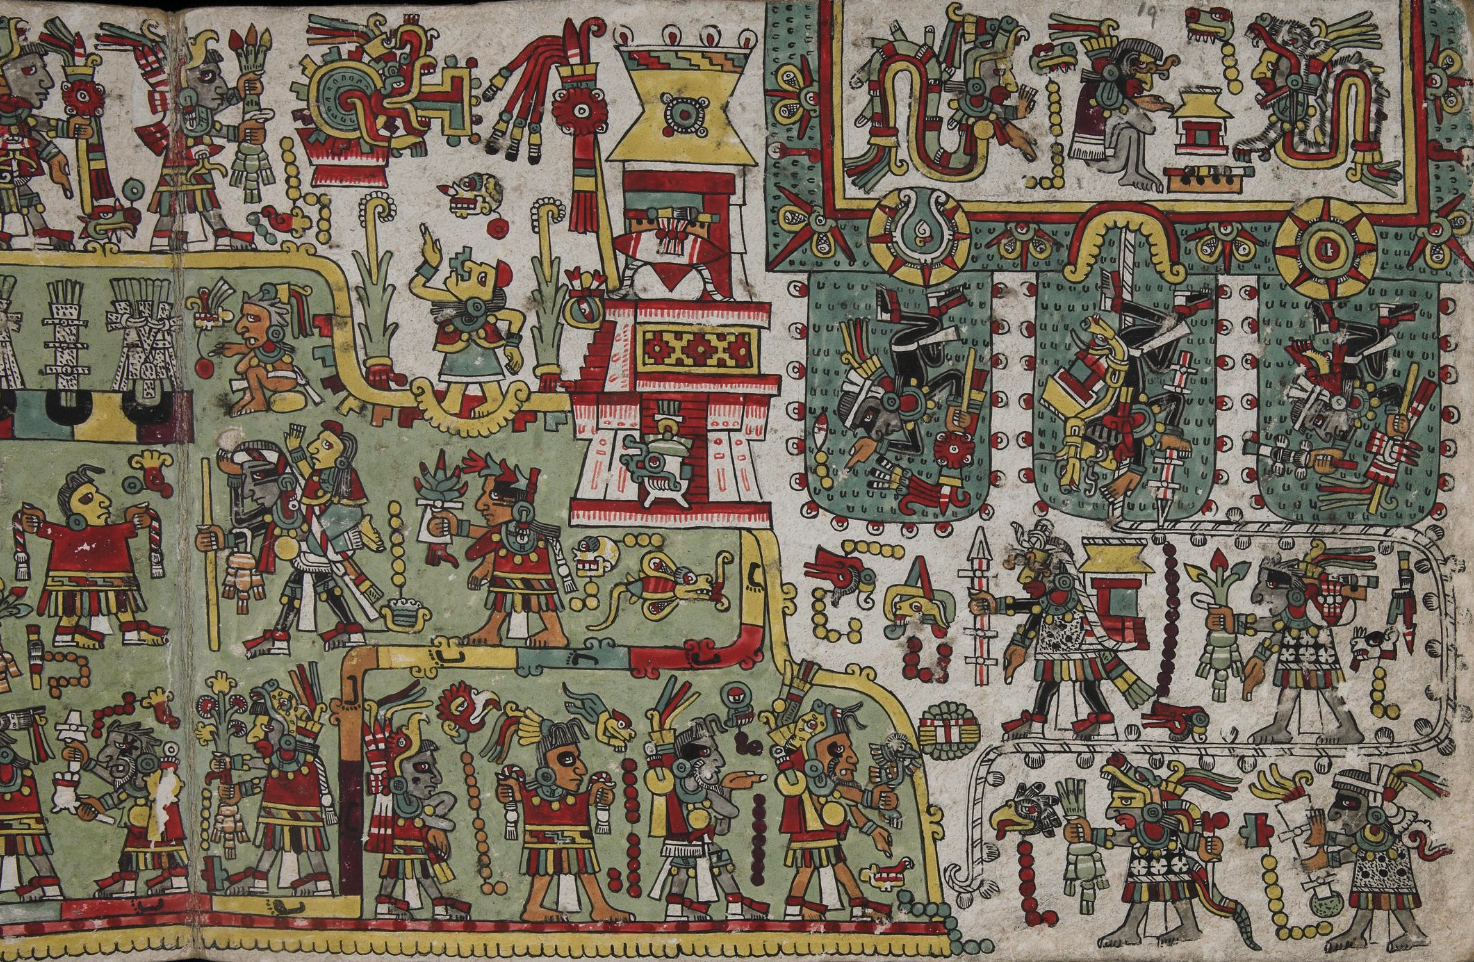 An image of page 19 of the Zouch-Nuttall Mixtec Codex